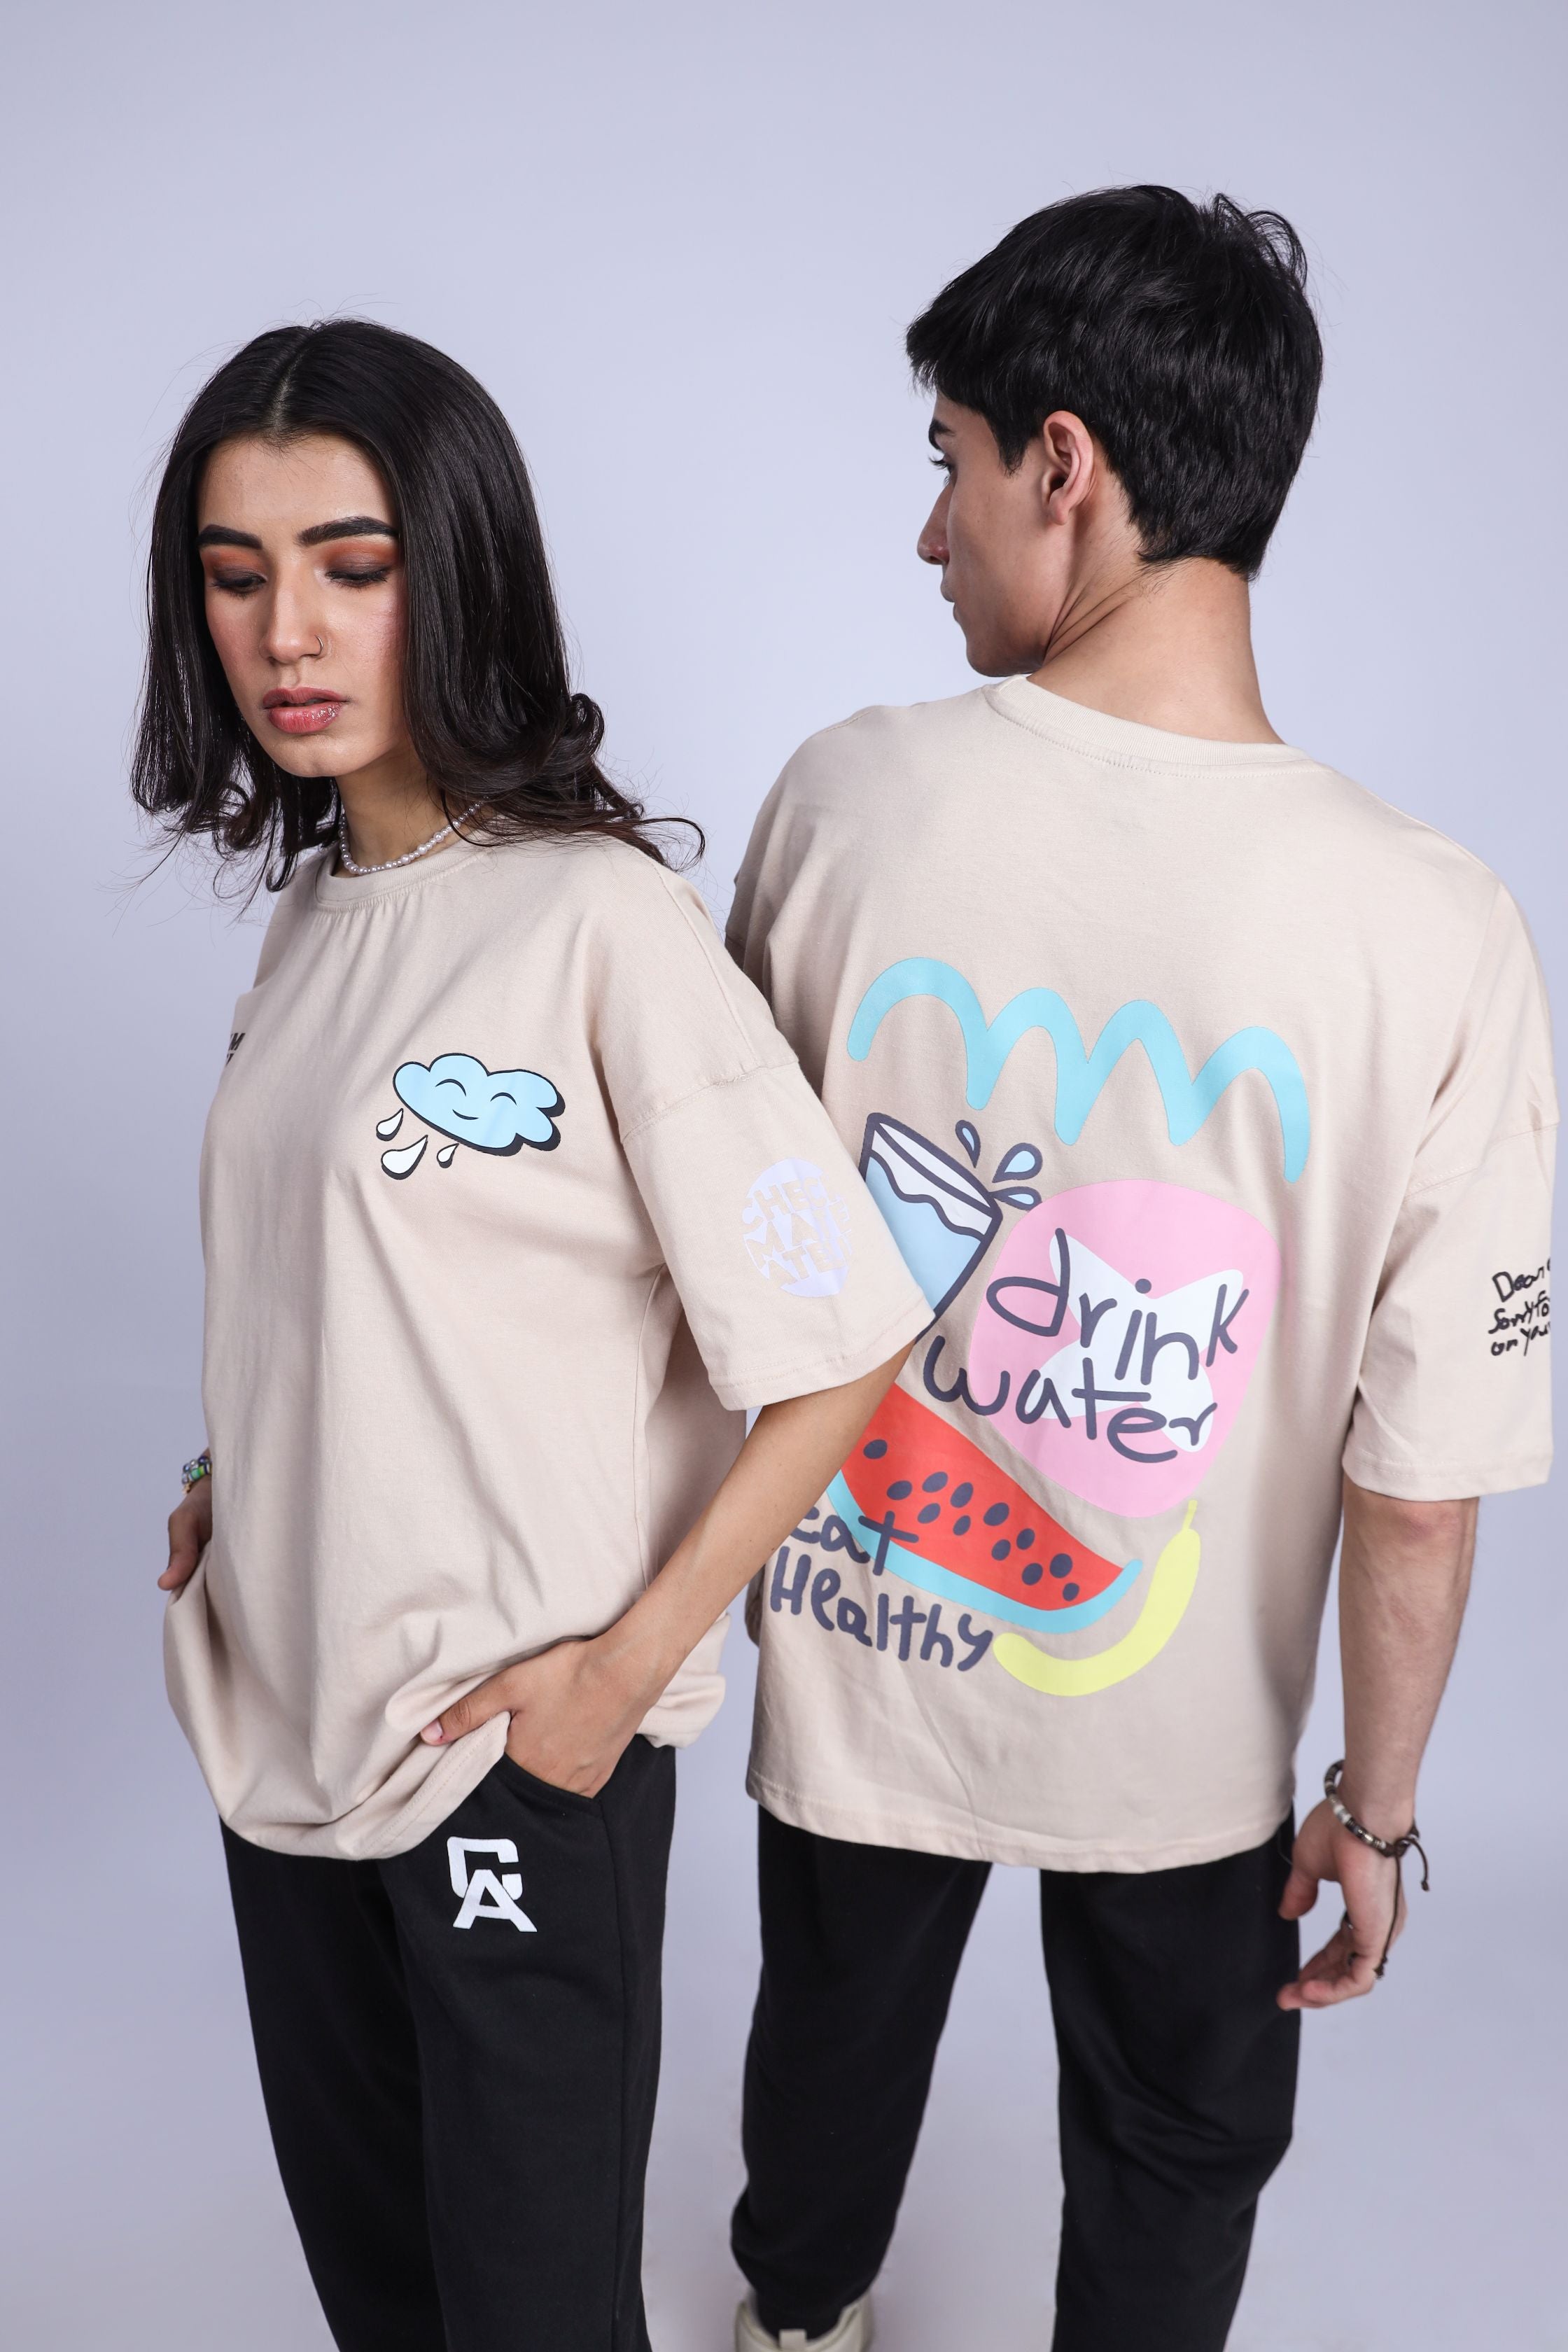 EAT HEALTHY OVERSIZED T-SHIRT